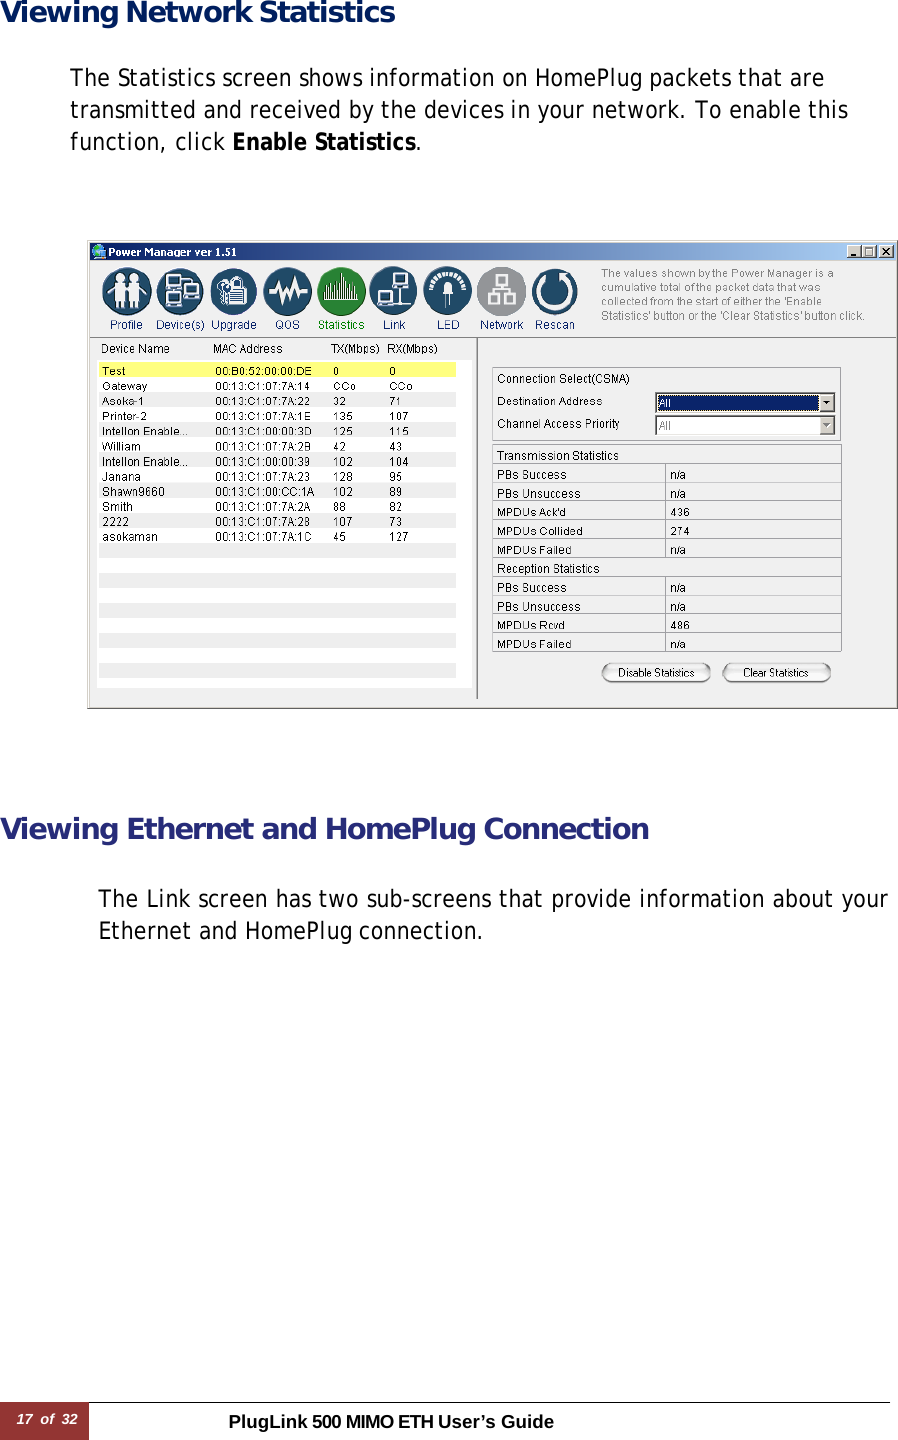 17 of 32 PlugLink 500 MIMO ETH User’s Guide Viewing Network Statistics   The Statistics screen shows information on HomePlug packets that are transmitted and received by the devices in your network. To enable this function, click Enable Statistics.            Viewing Ethernet and HomePlug Connection   The Link screen has two sub-screens that provide information about your Ethernet and HomePlug connection. 